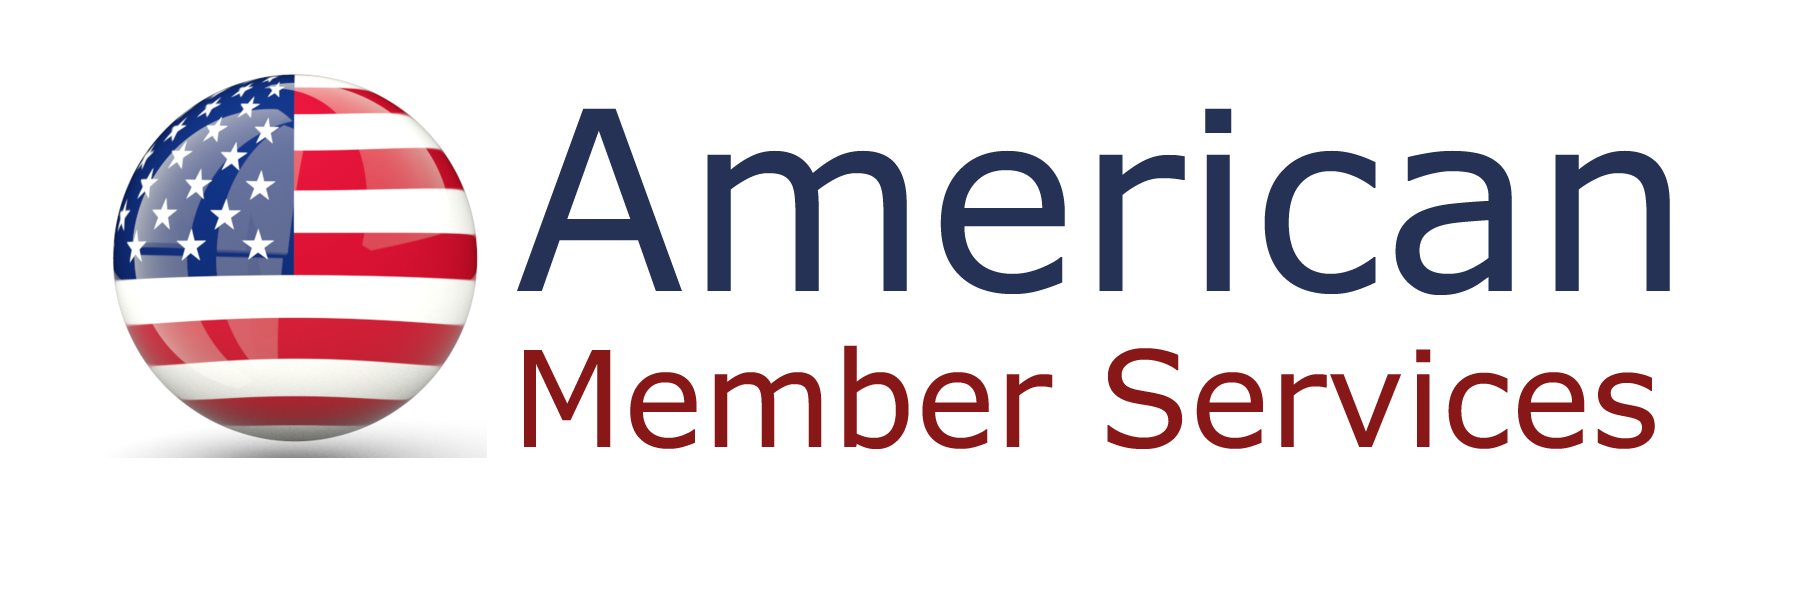 American Member Services